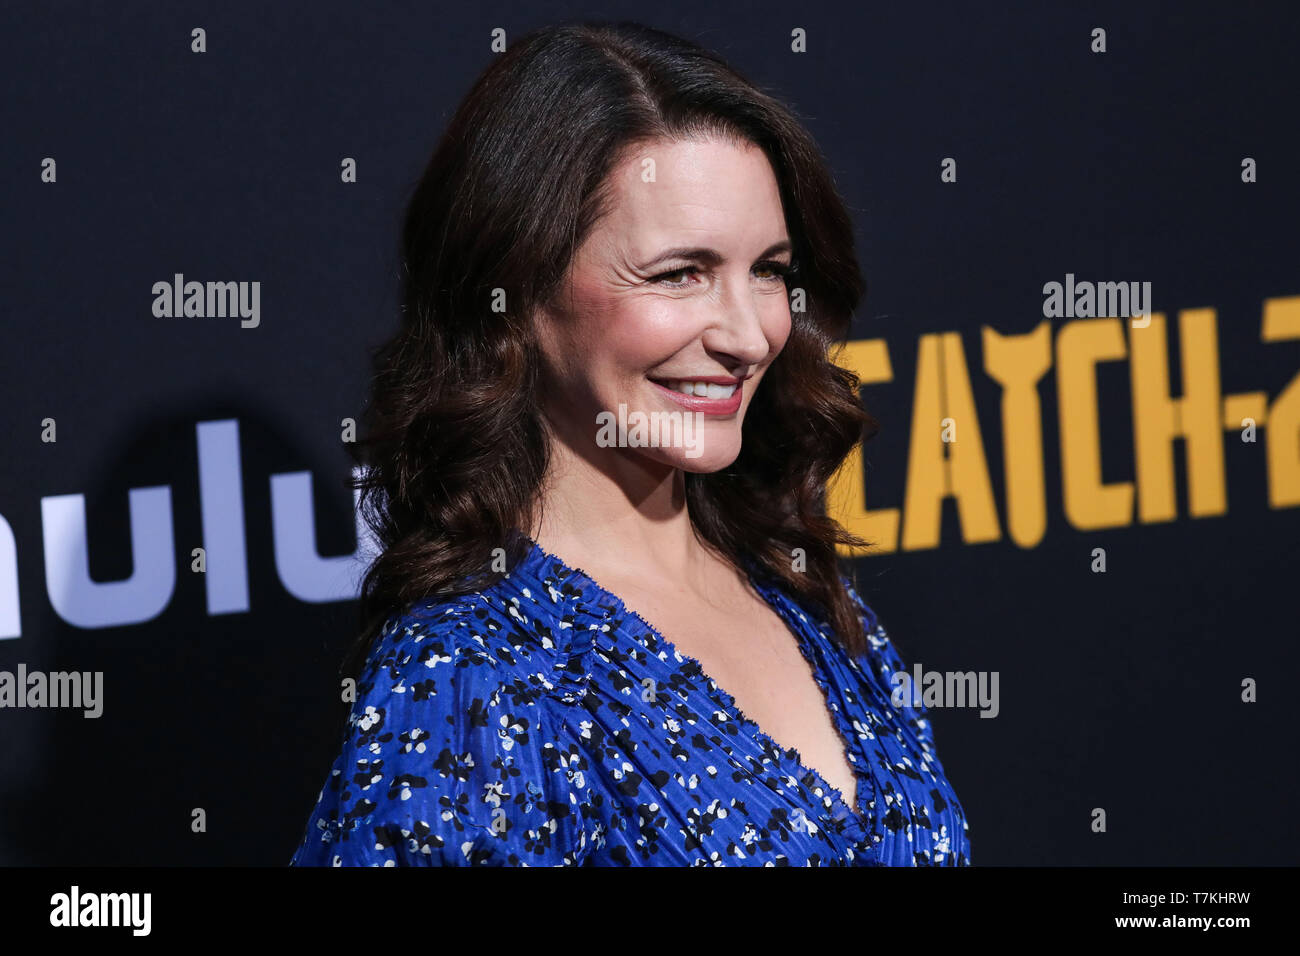 Hollywood, United States. 07th May, 2019. HOLLYWOOD, LOS ANGELES, CALIFORNIA, USA - MAY 07: Actress Kristin Davis wearing Ulla Johnson arrives at the Los Angeles Premiere Of Hulu's 'Catch-22' held at the TCL Chinese Theatre IMAX on May 7, 2019 in Hollywood, Los Angeles, California, United States. (Photo by Xavier Collin/Image Press Agency) Credit: Image Press Agency/Alamy Live News Stock Photo